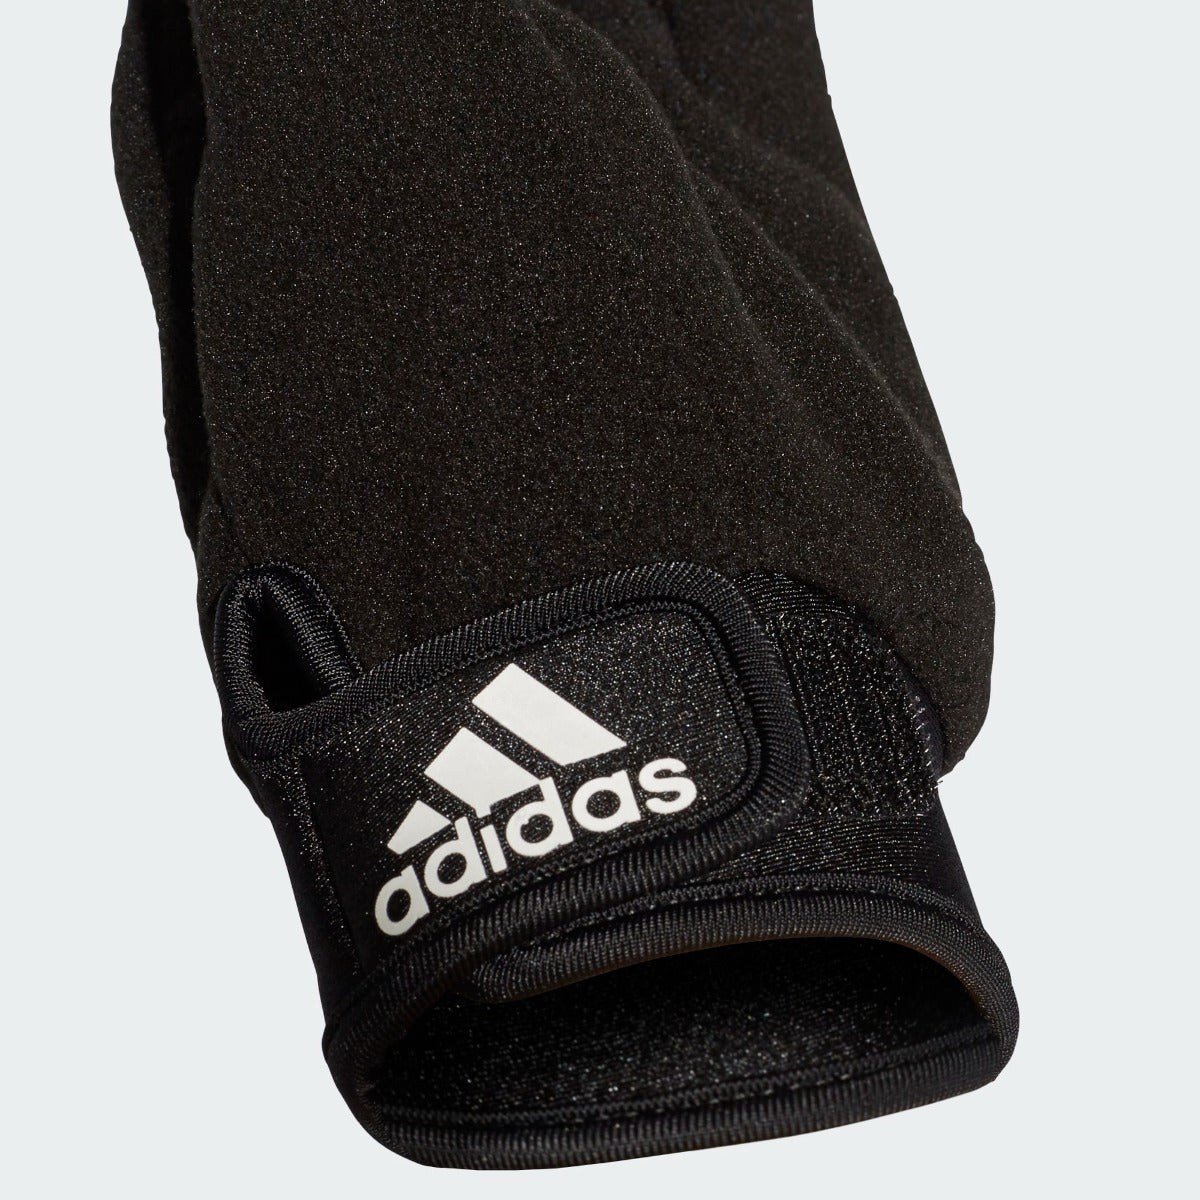 Adidas Field Players Gloves - Black (Detail 2)